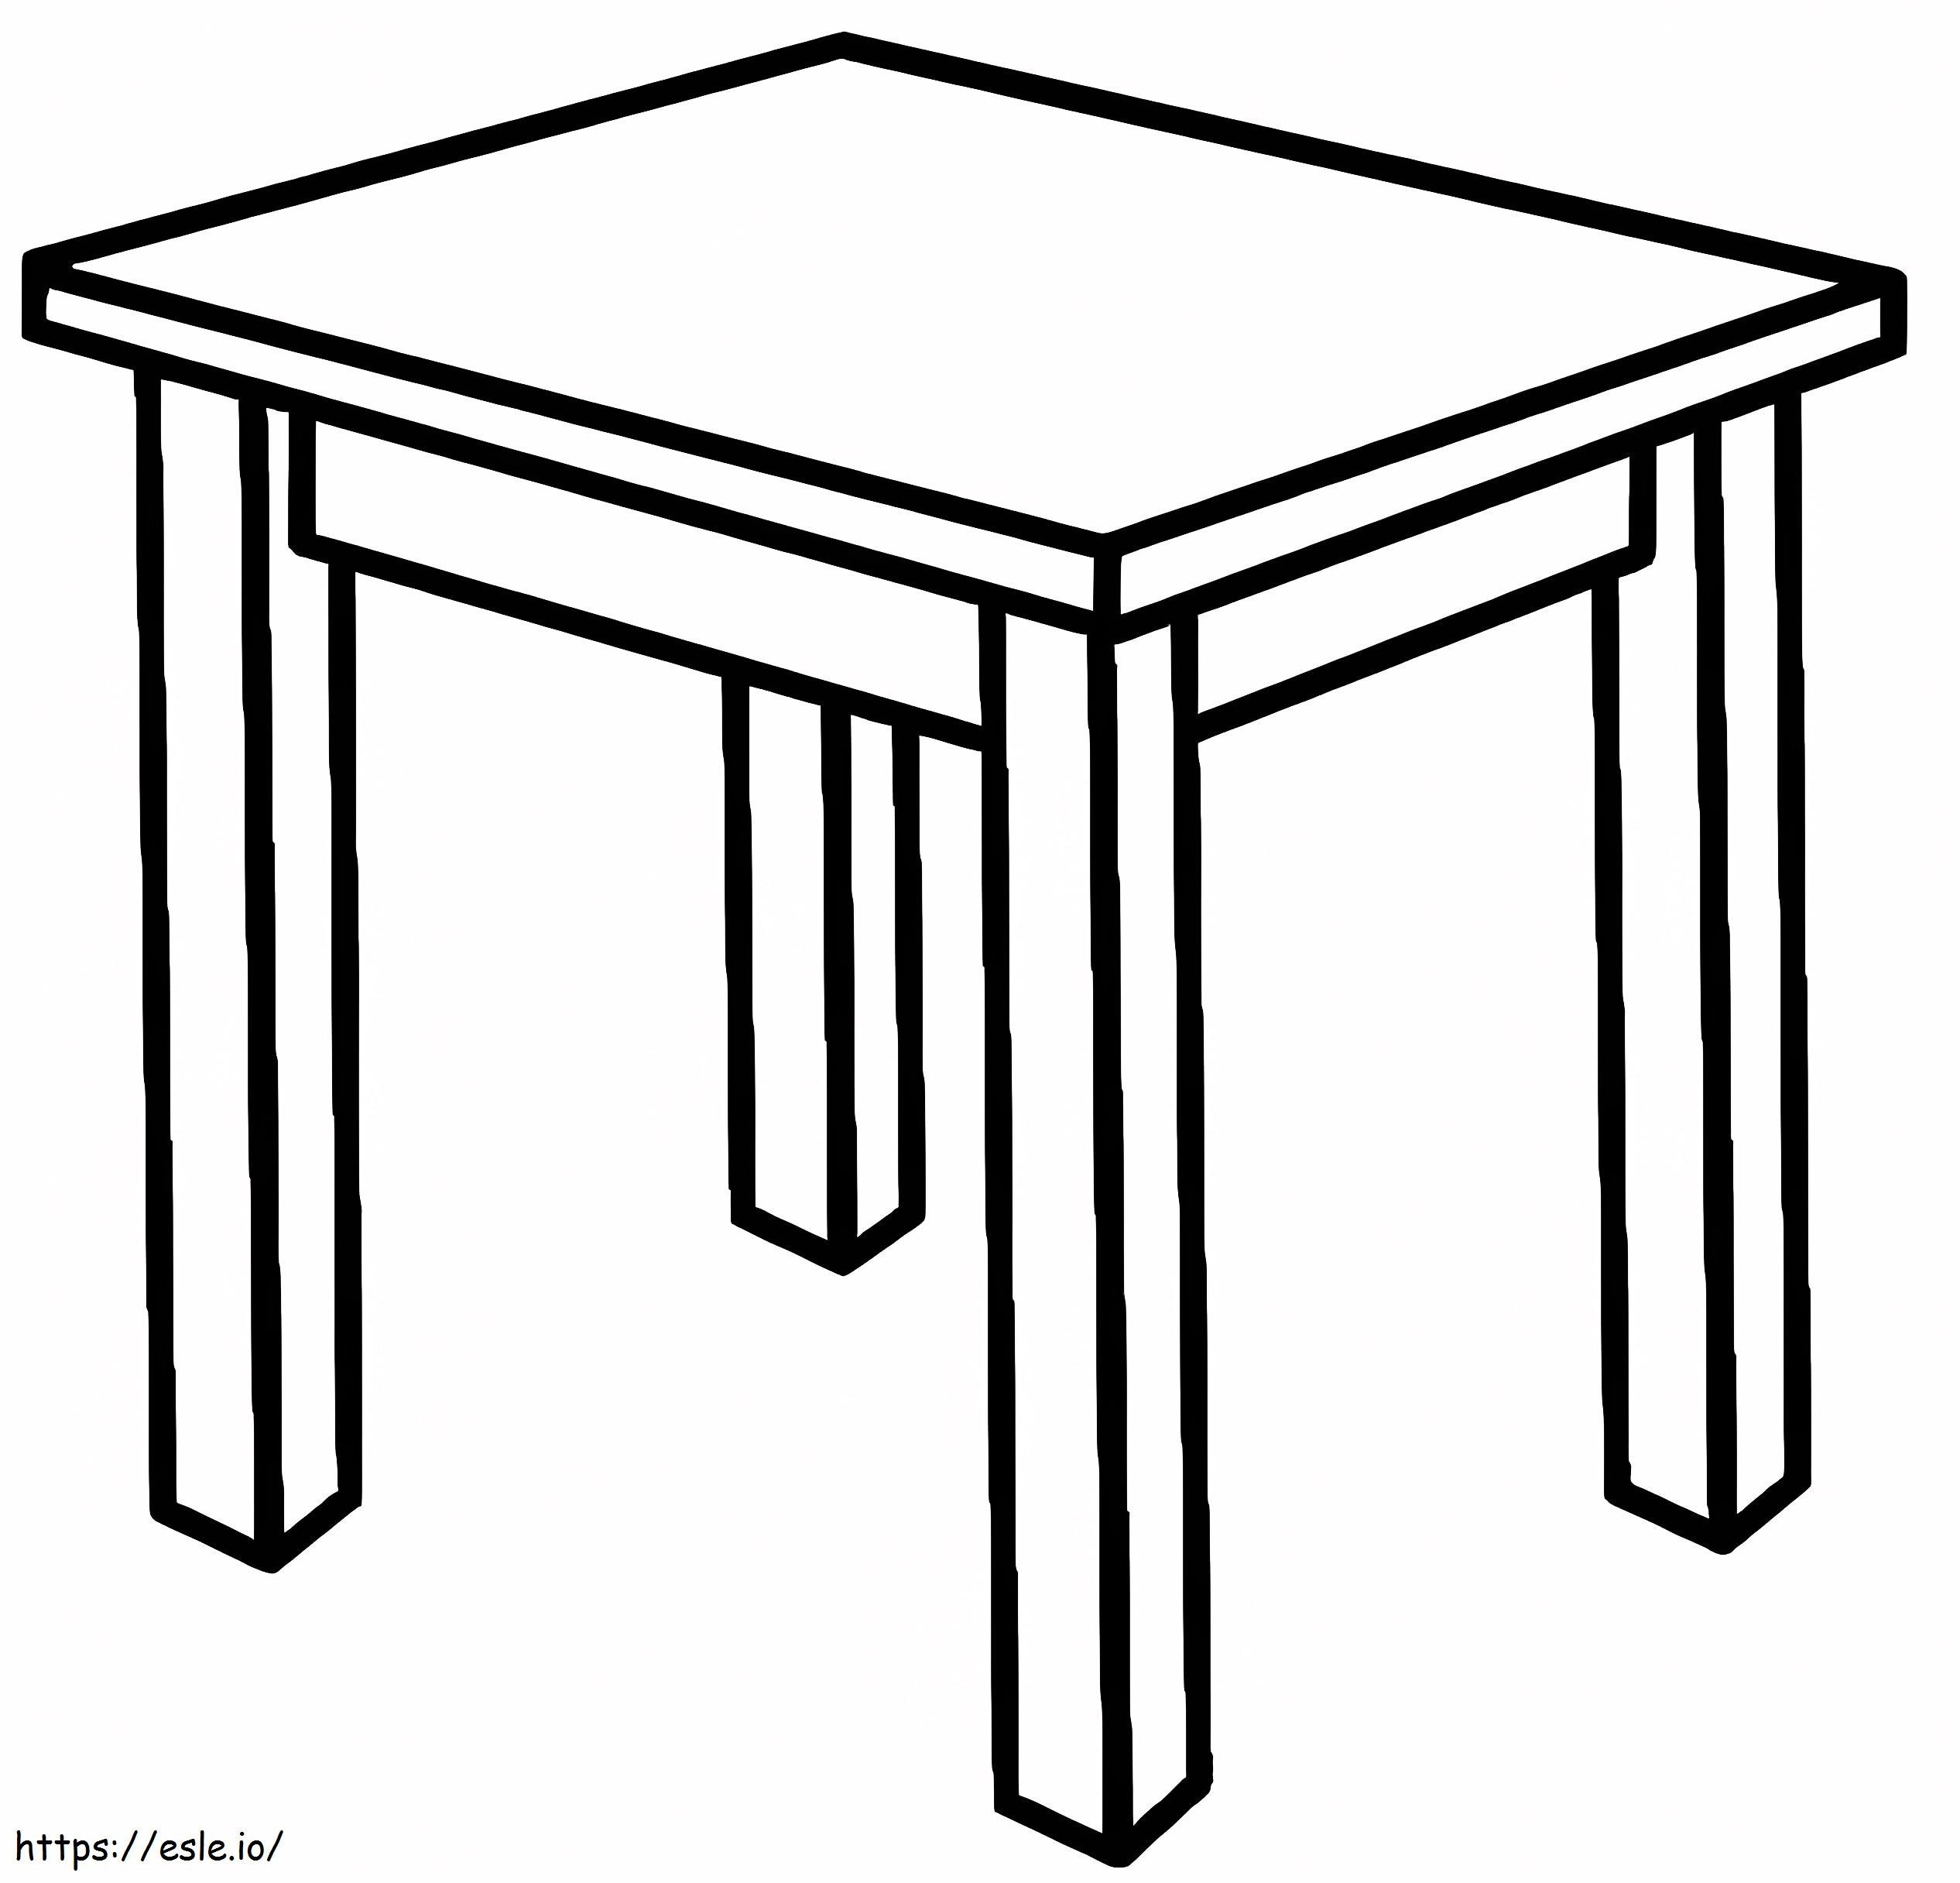 Basic Table coloring page